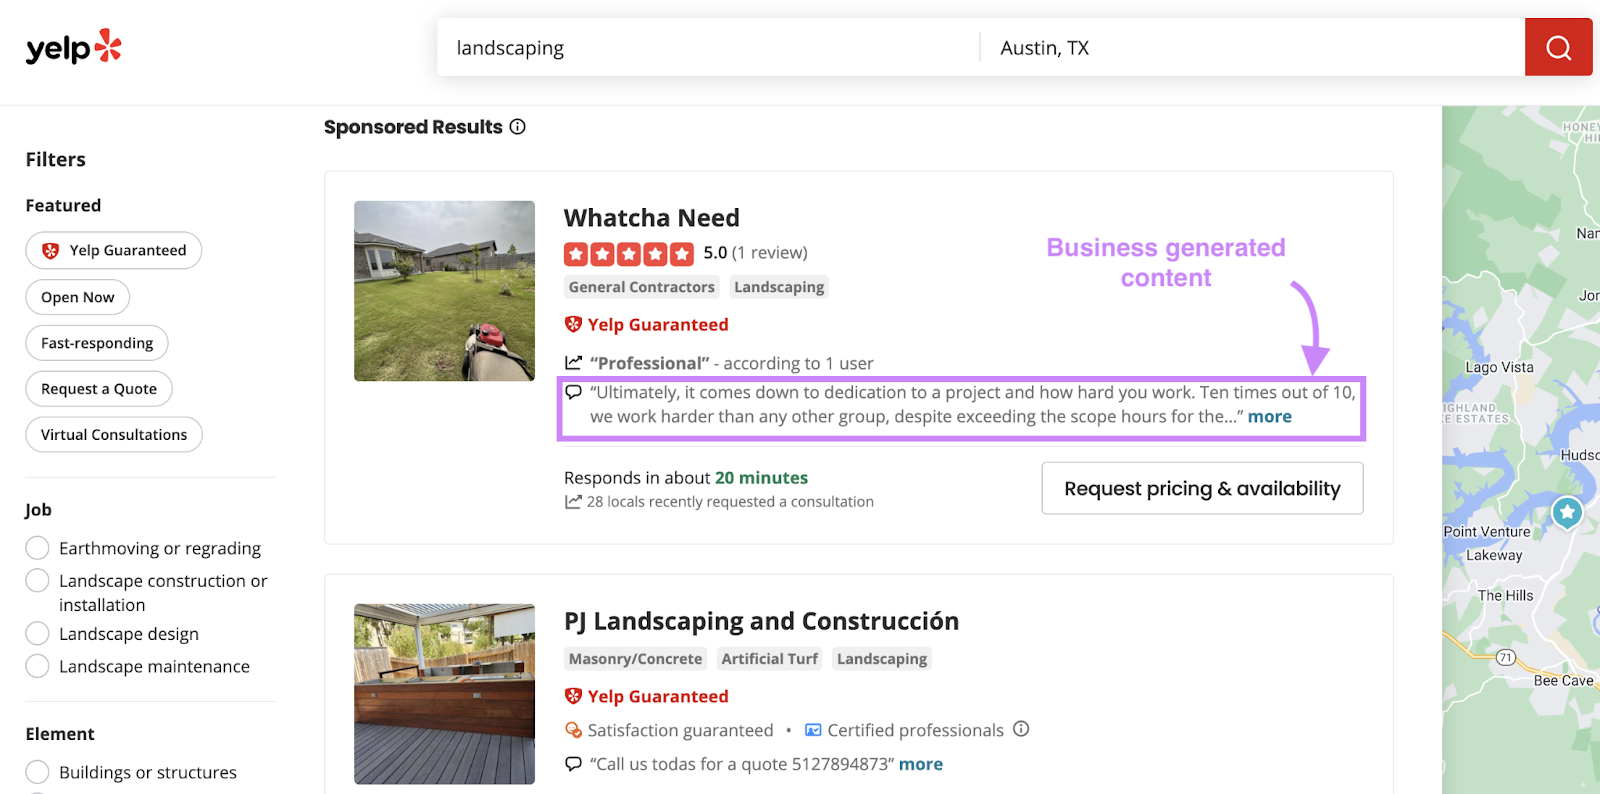 Business generated content for "Whatcha Need" on Yelp